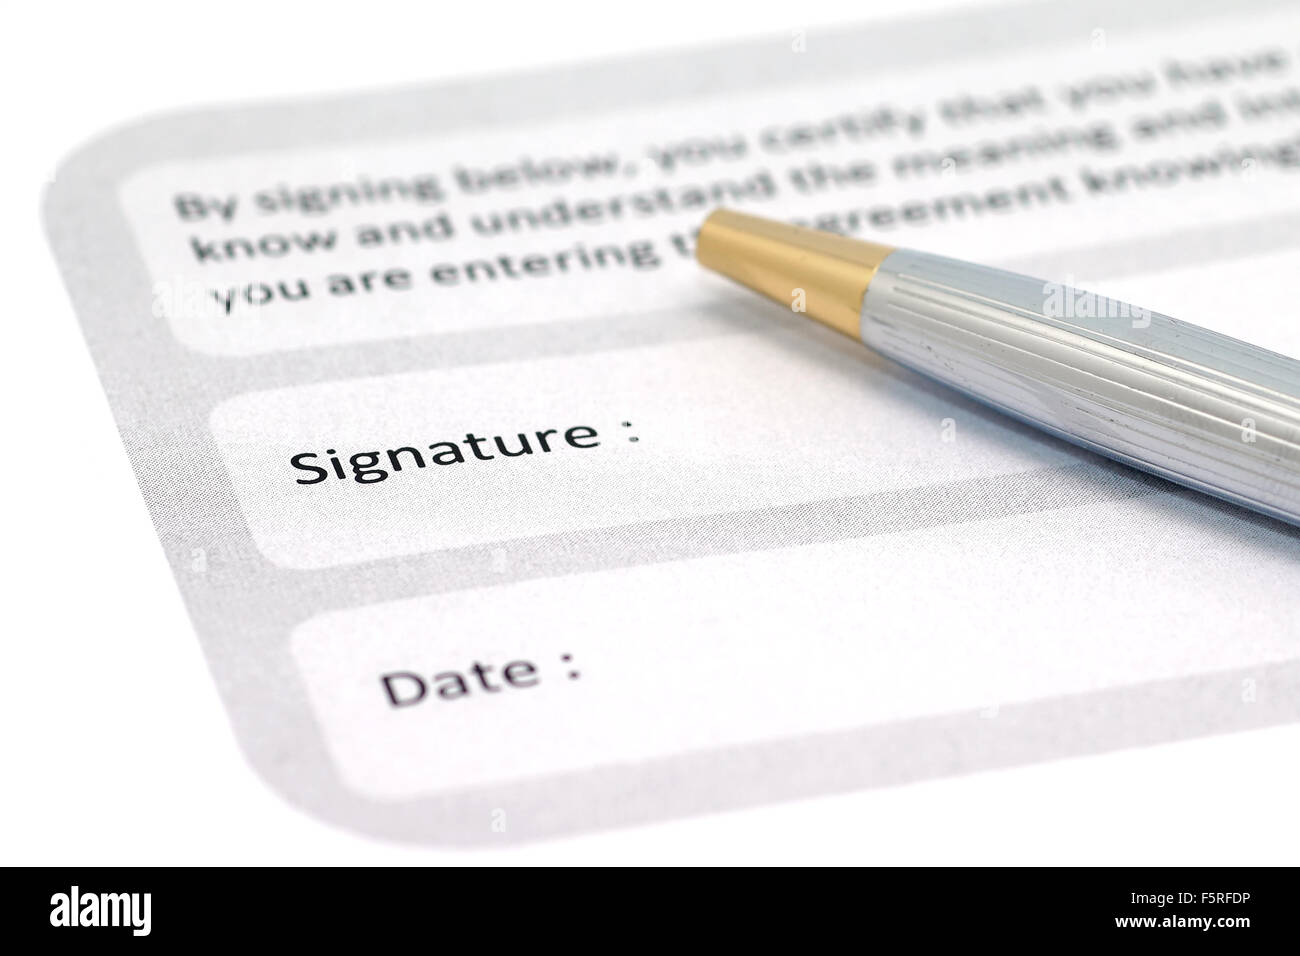 signature field on document with a pen Stock Photo